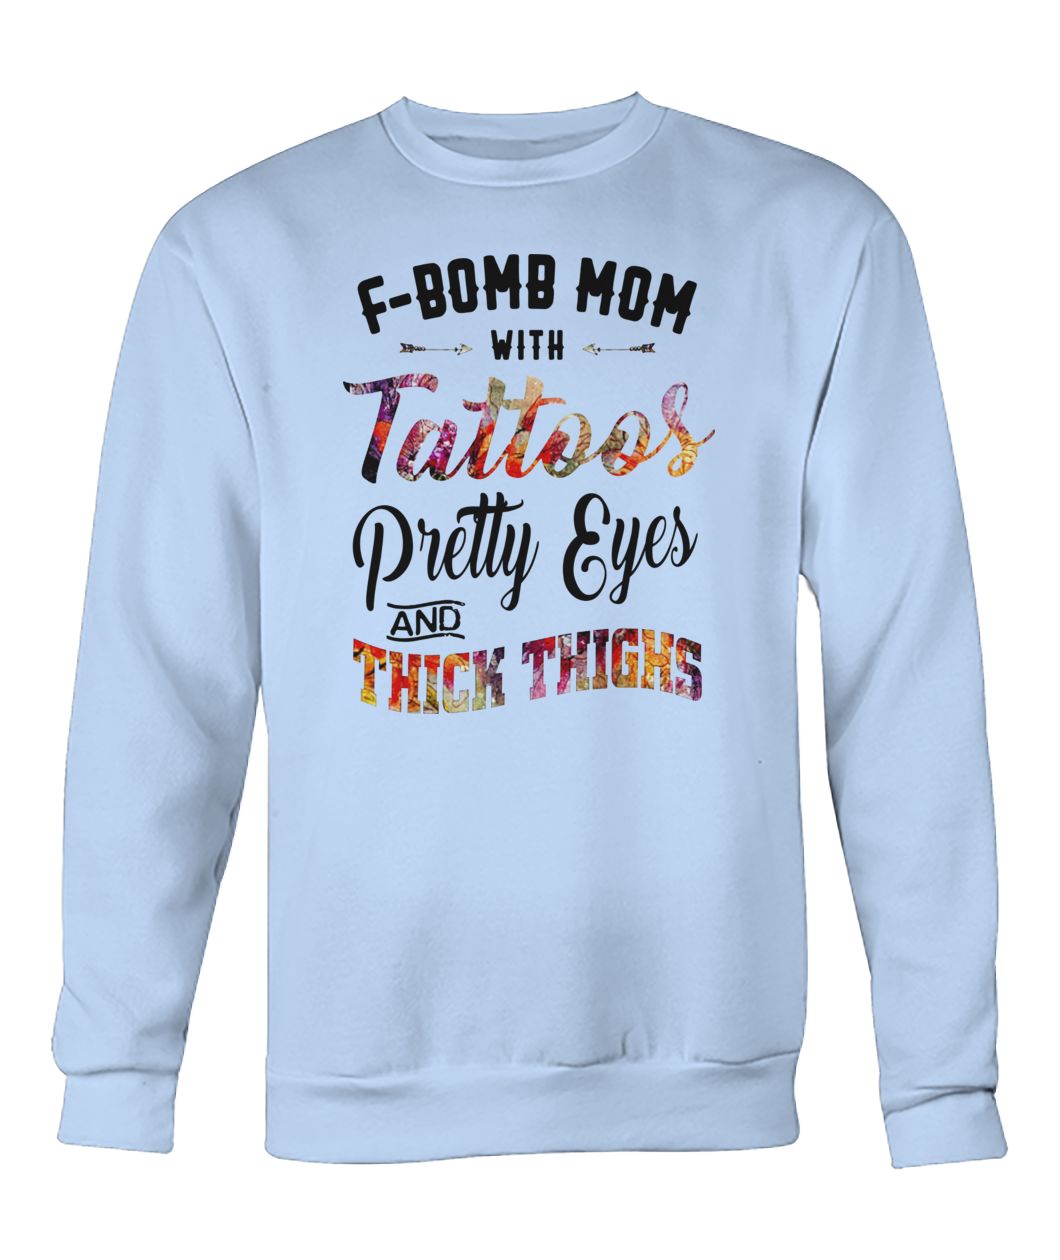 F bomb mom with tattoos pretty eyes and thick thighs crew neck sweatshirt